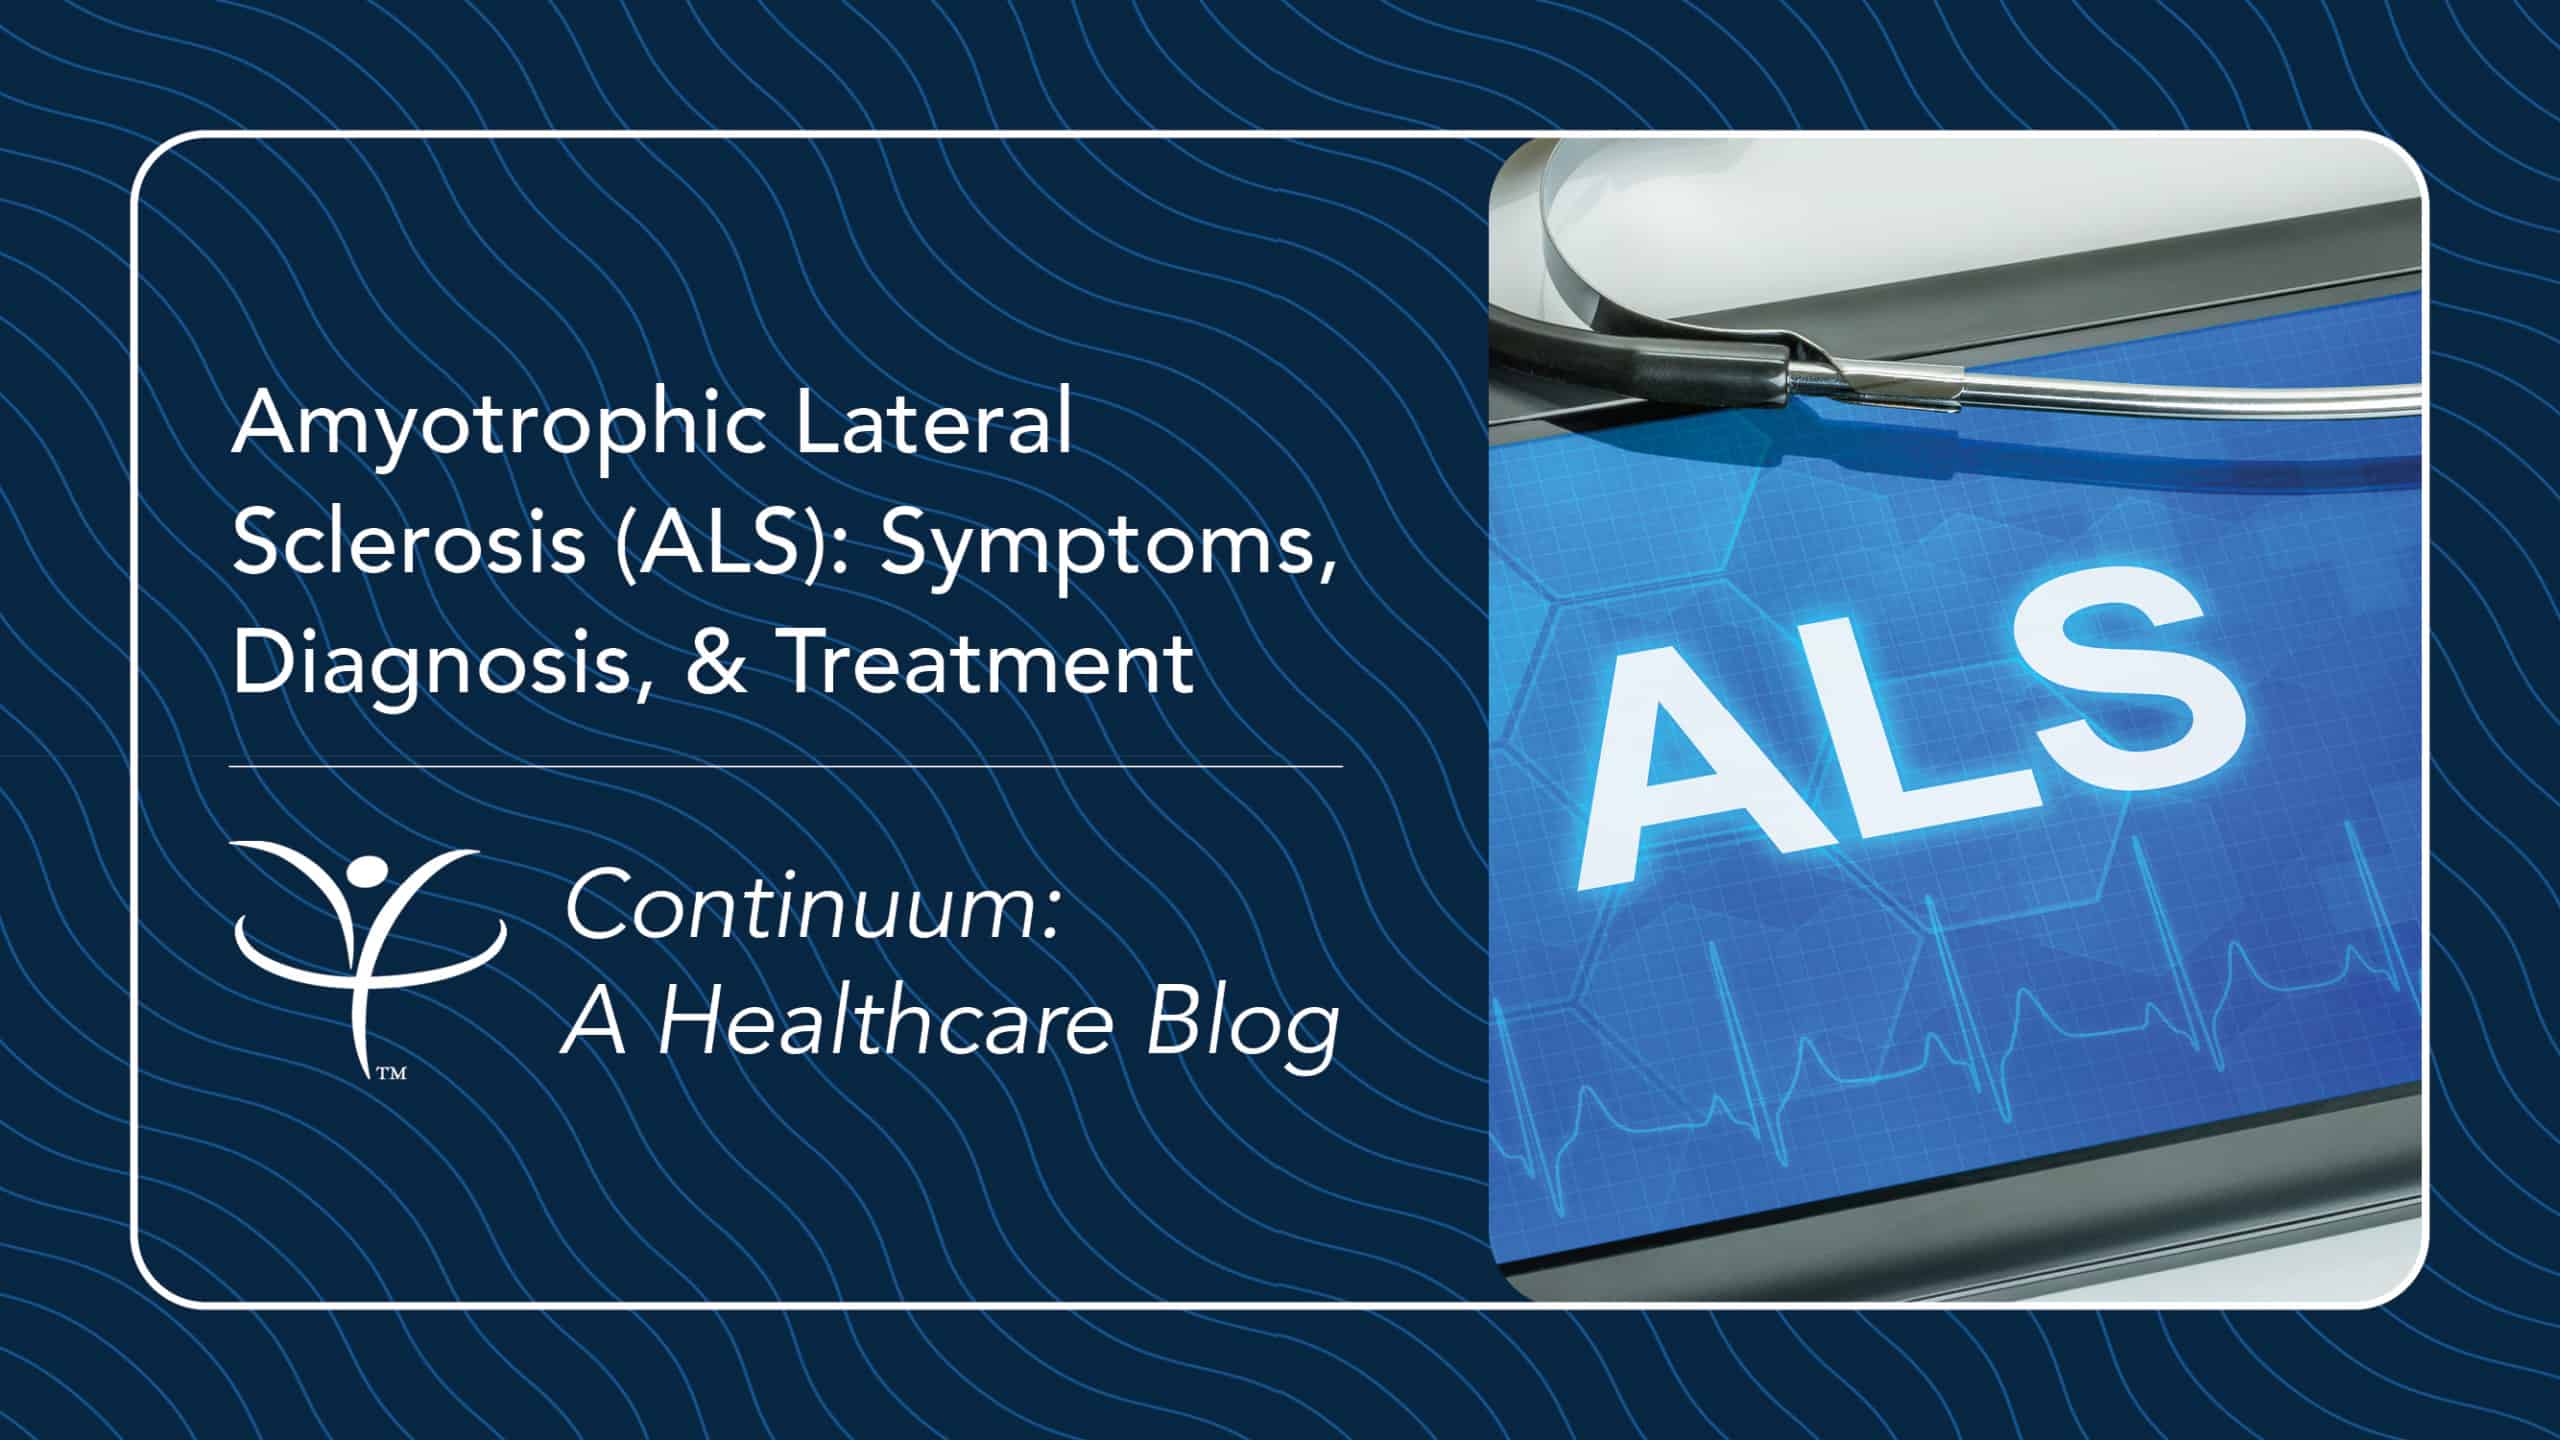 What is ALS? - Amyotrophic Lateral Sclerosis